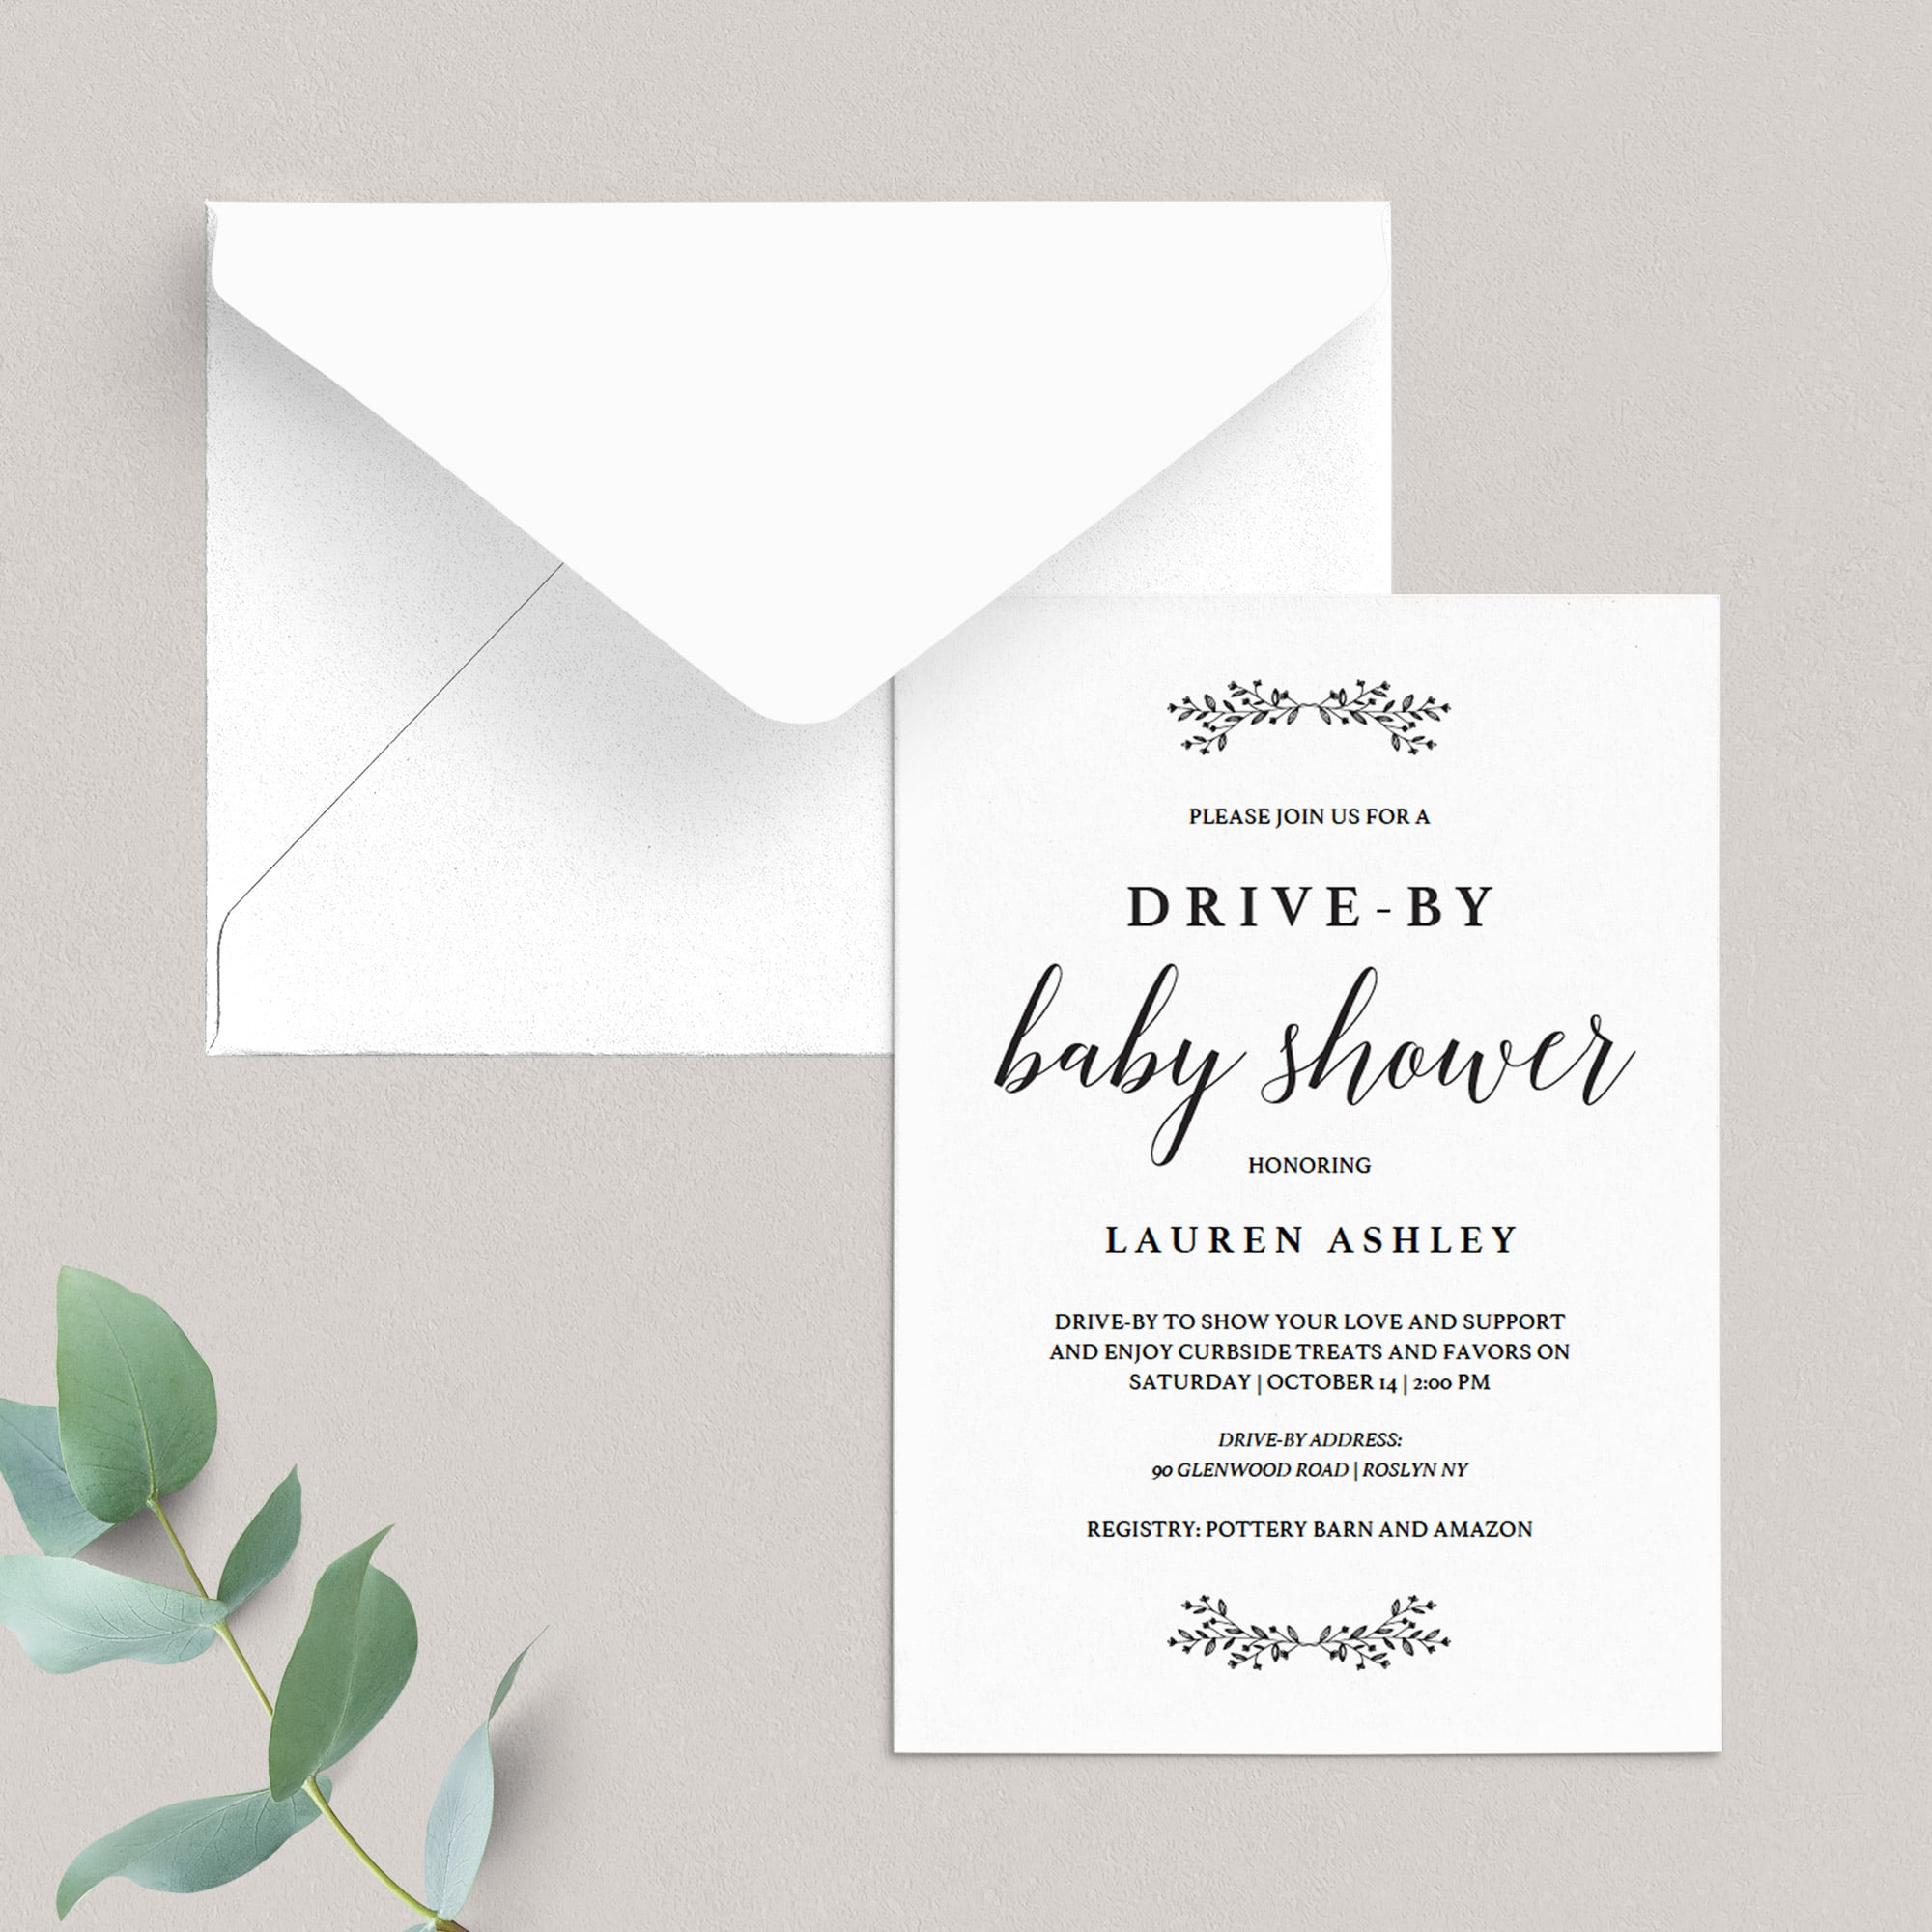 Drive by baby shower invitation download by LittleSizzle